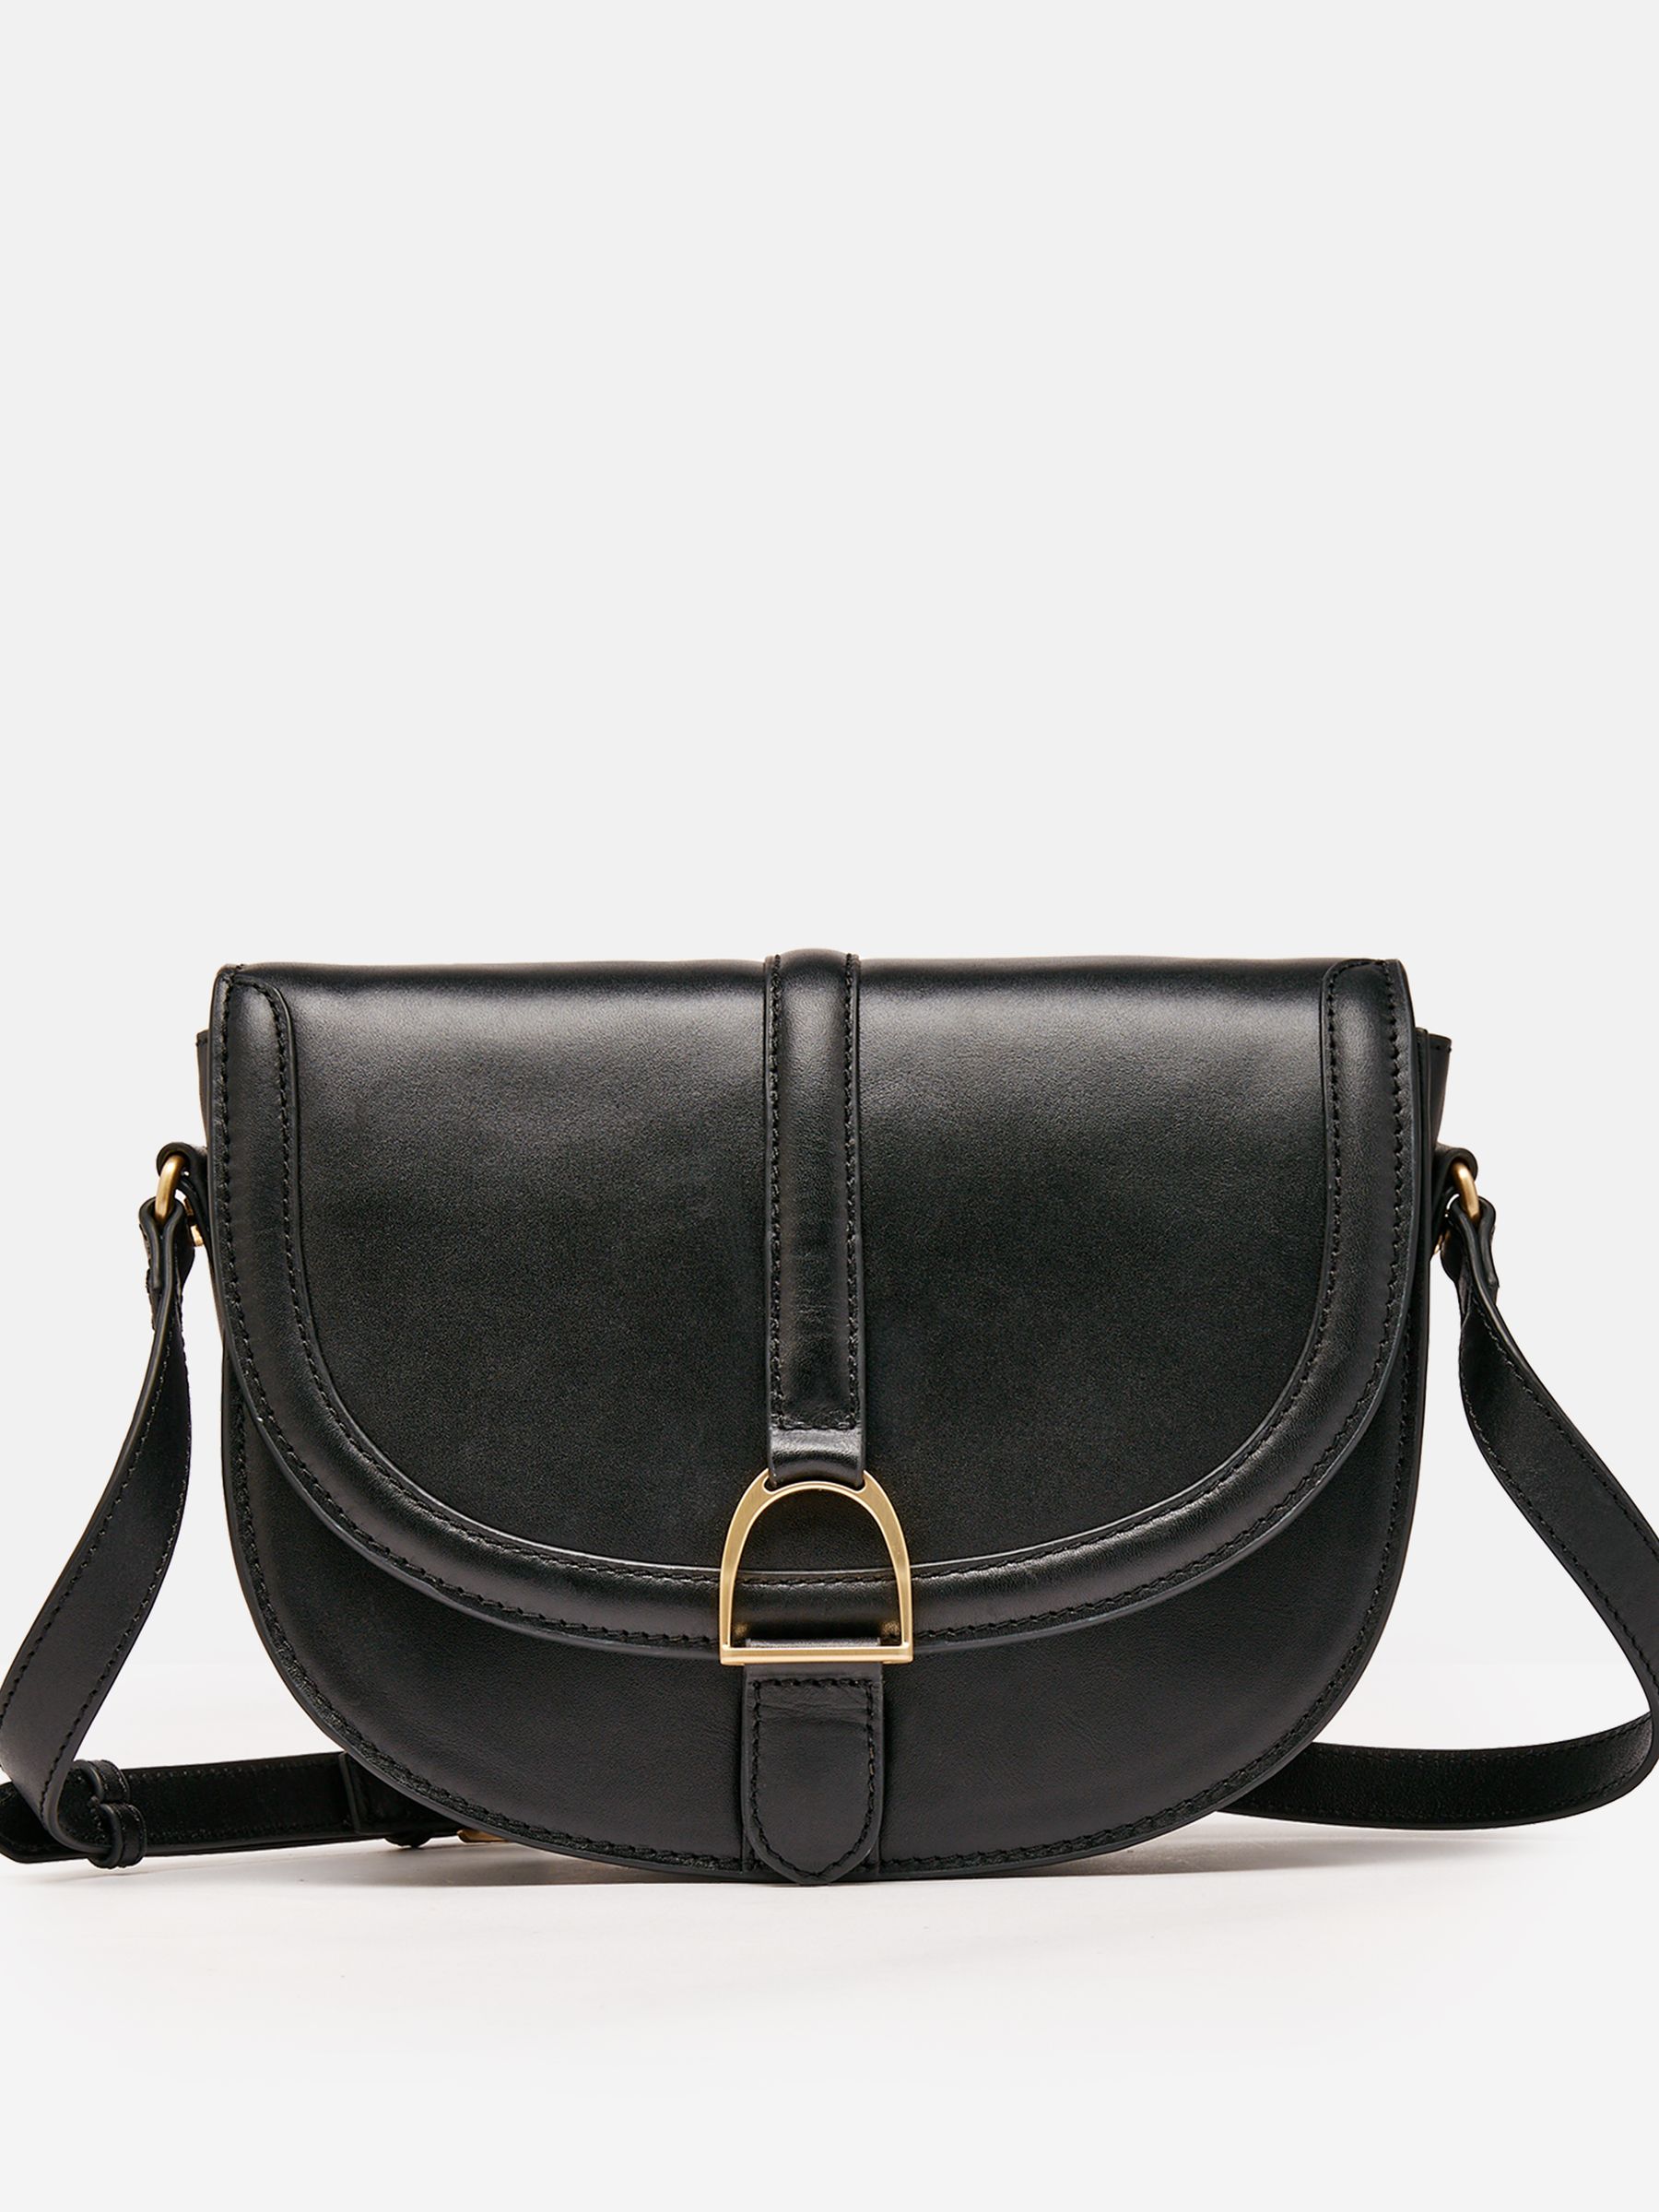 Buy Joules Soft Leather Cross Body Bag from the Joules online shop